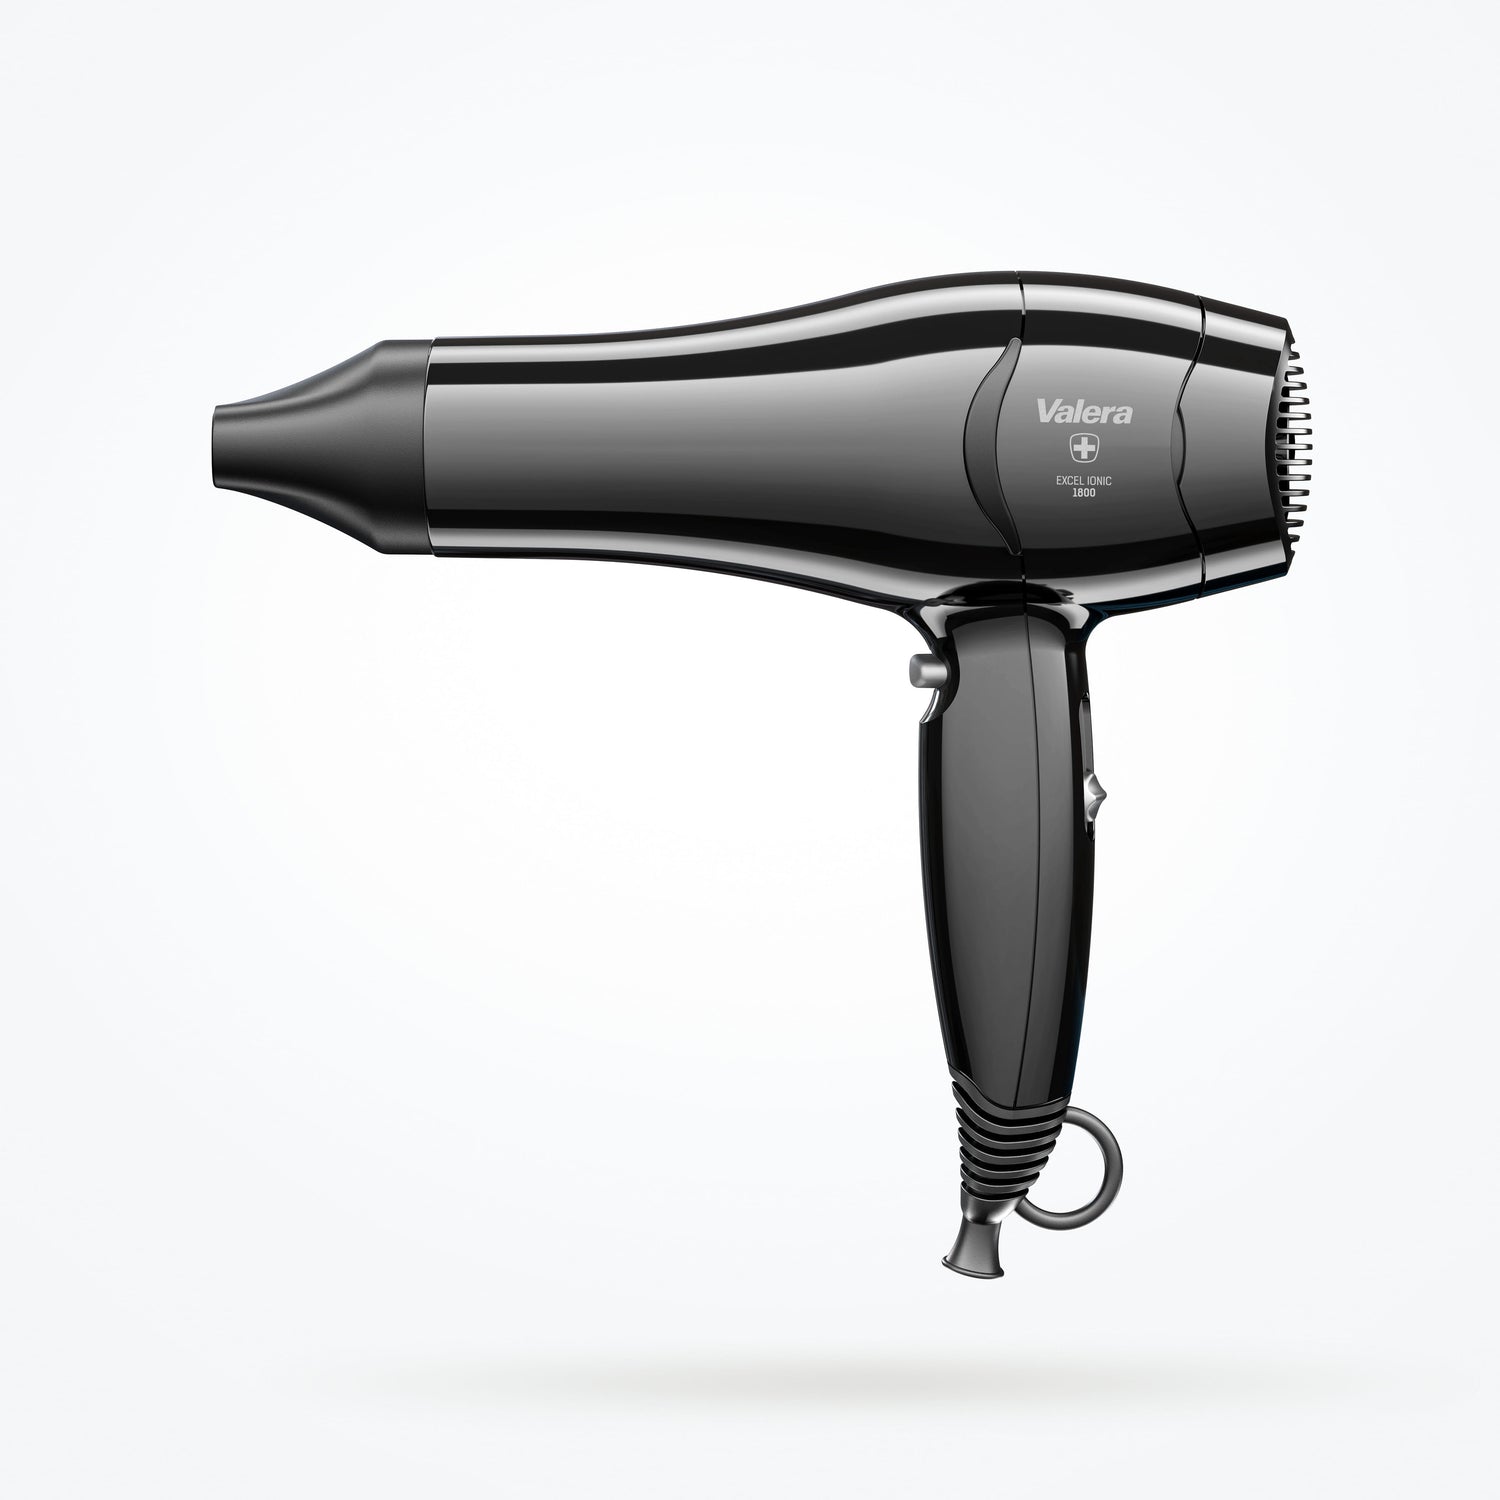 Excel 1800 TF professional hairdryer 